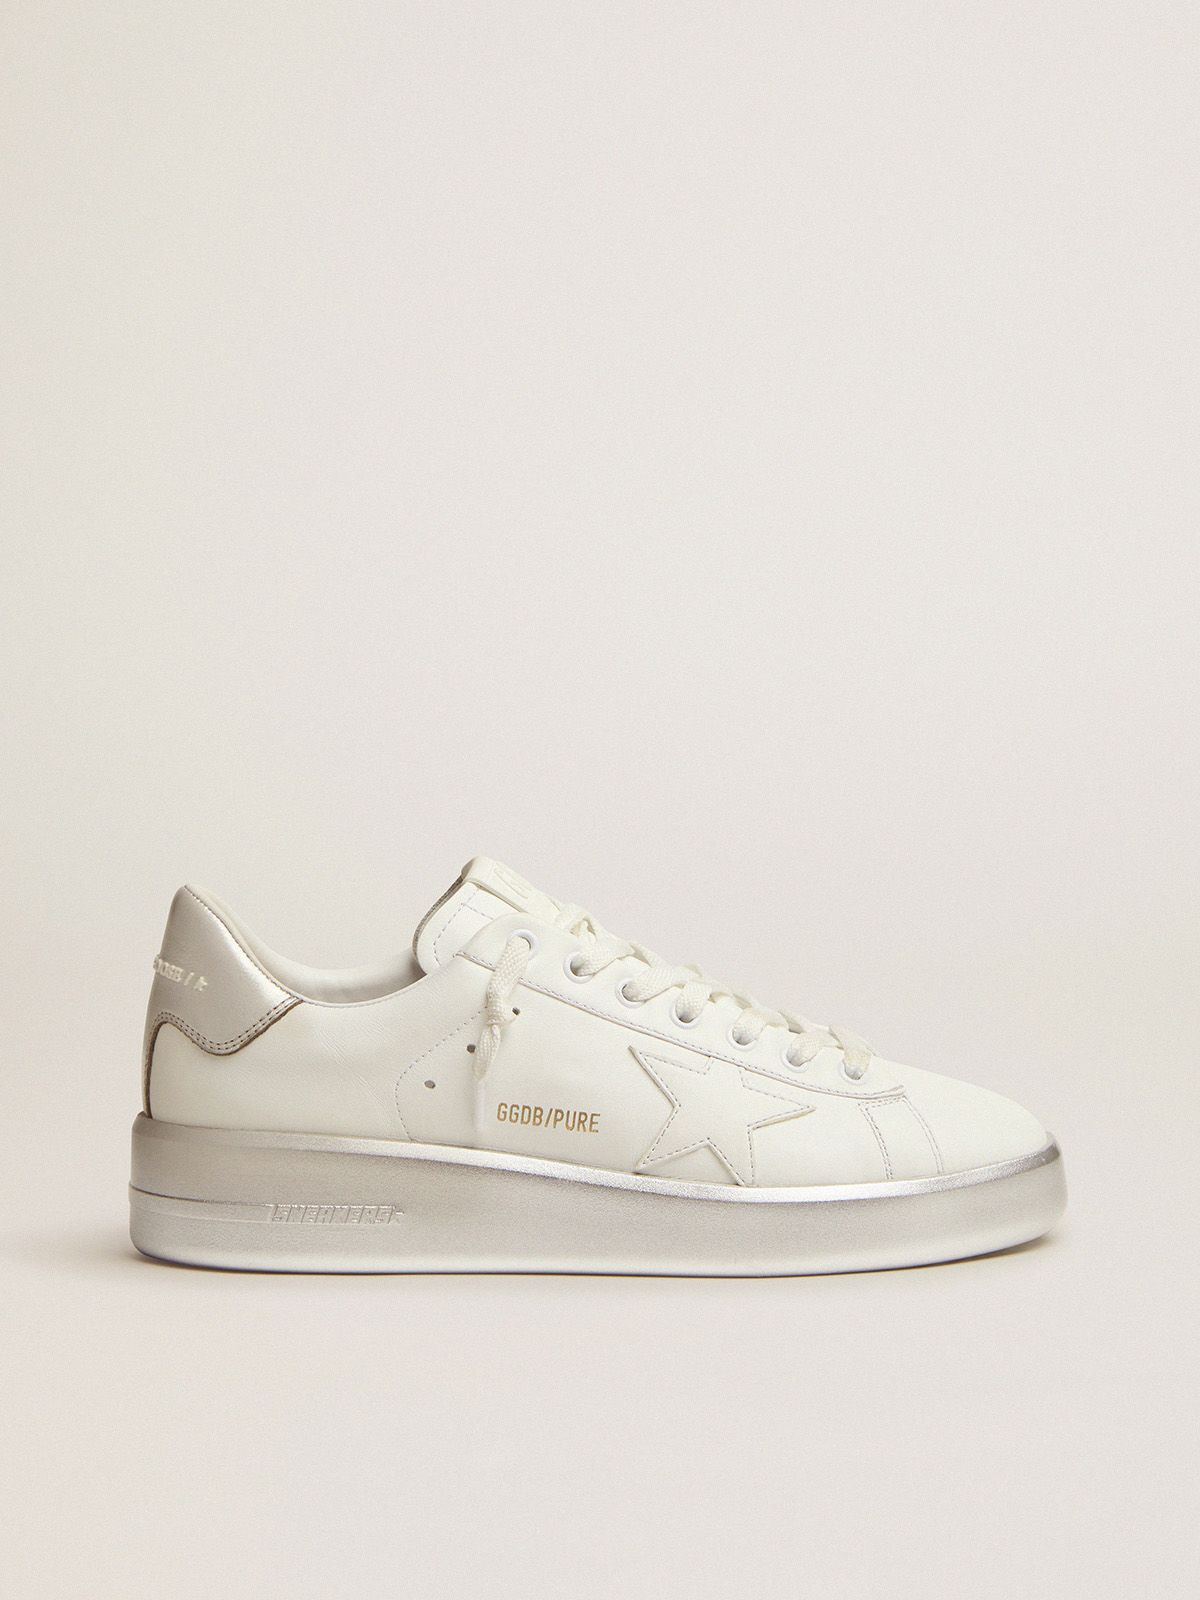 golden goose sneakers silver laminated tab with leather heel white and Purestar foxing in